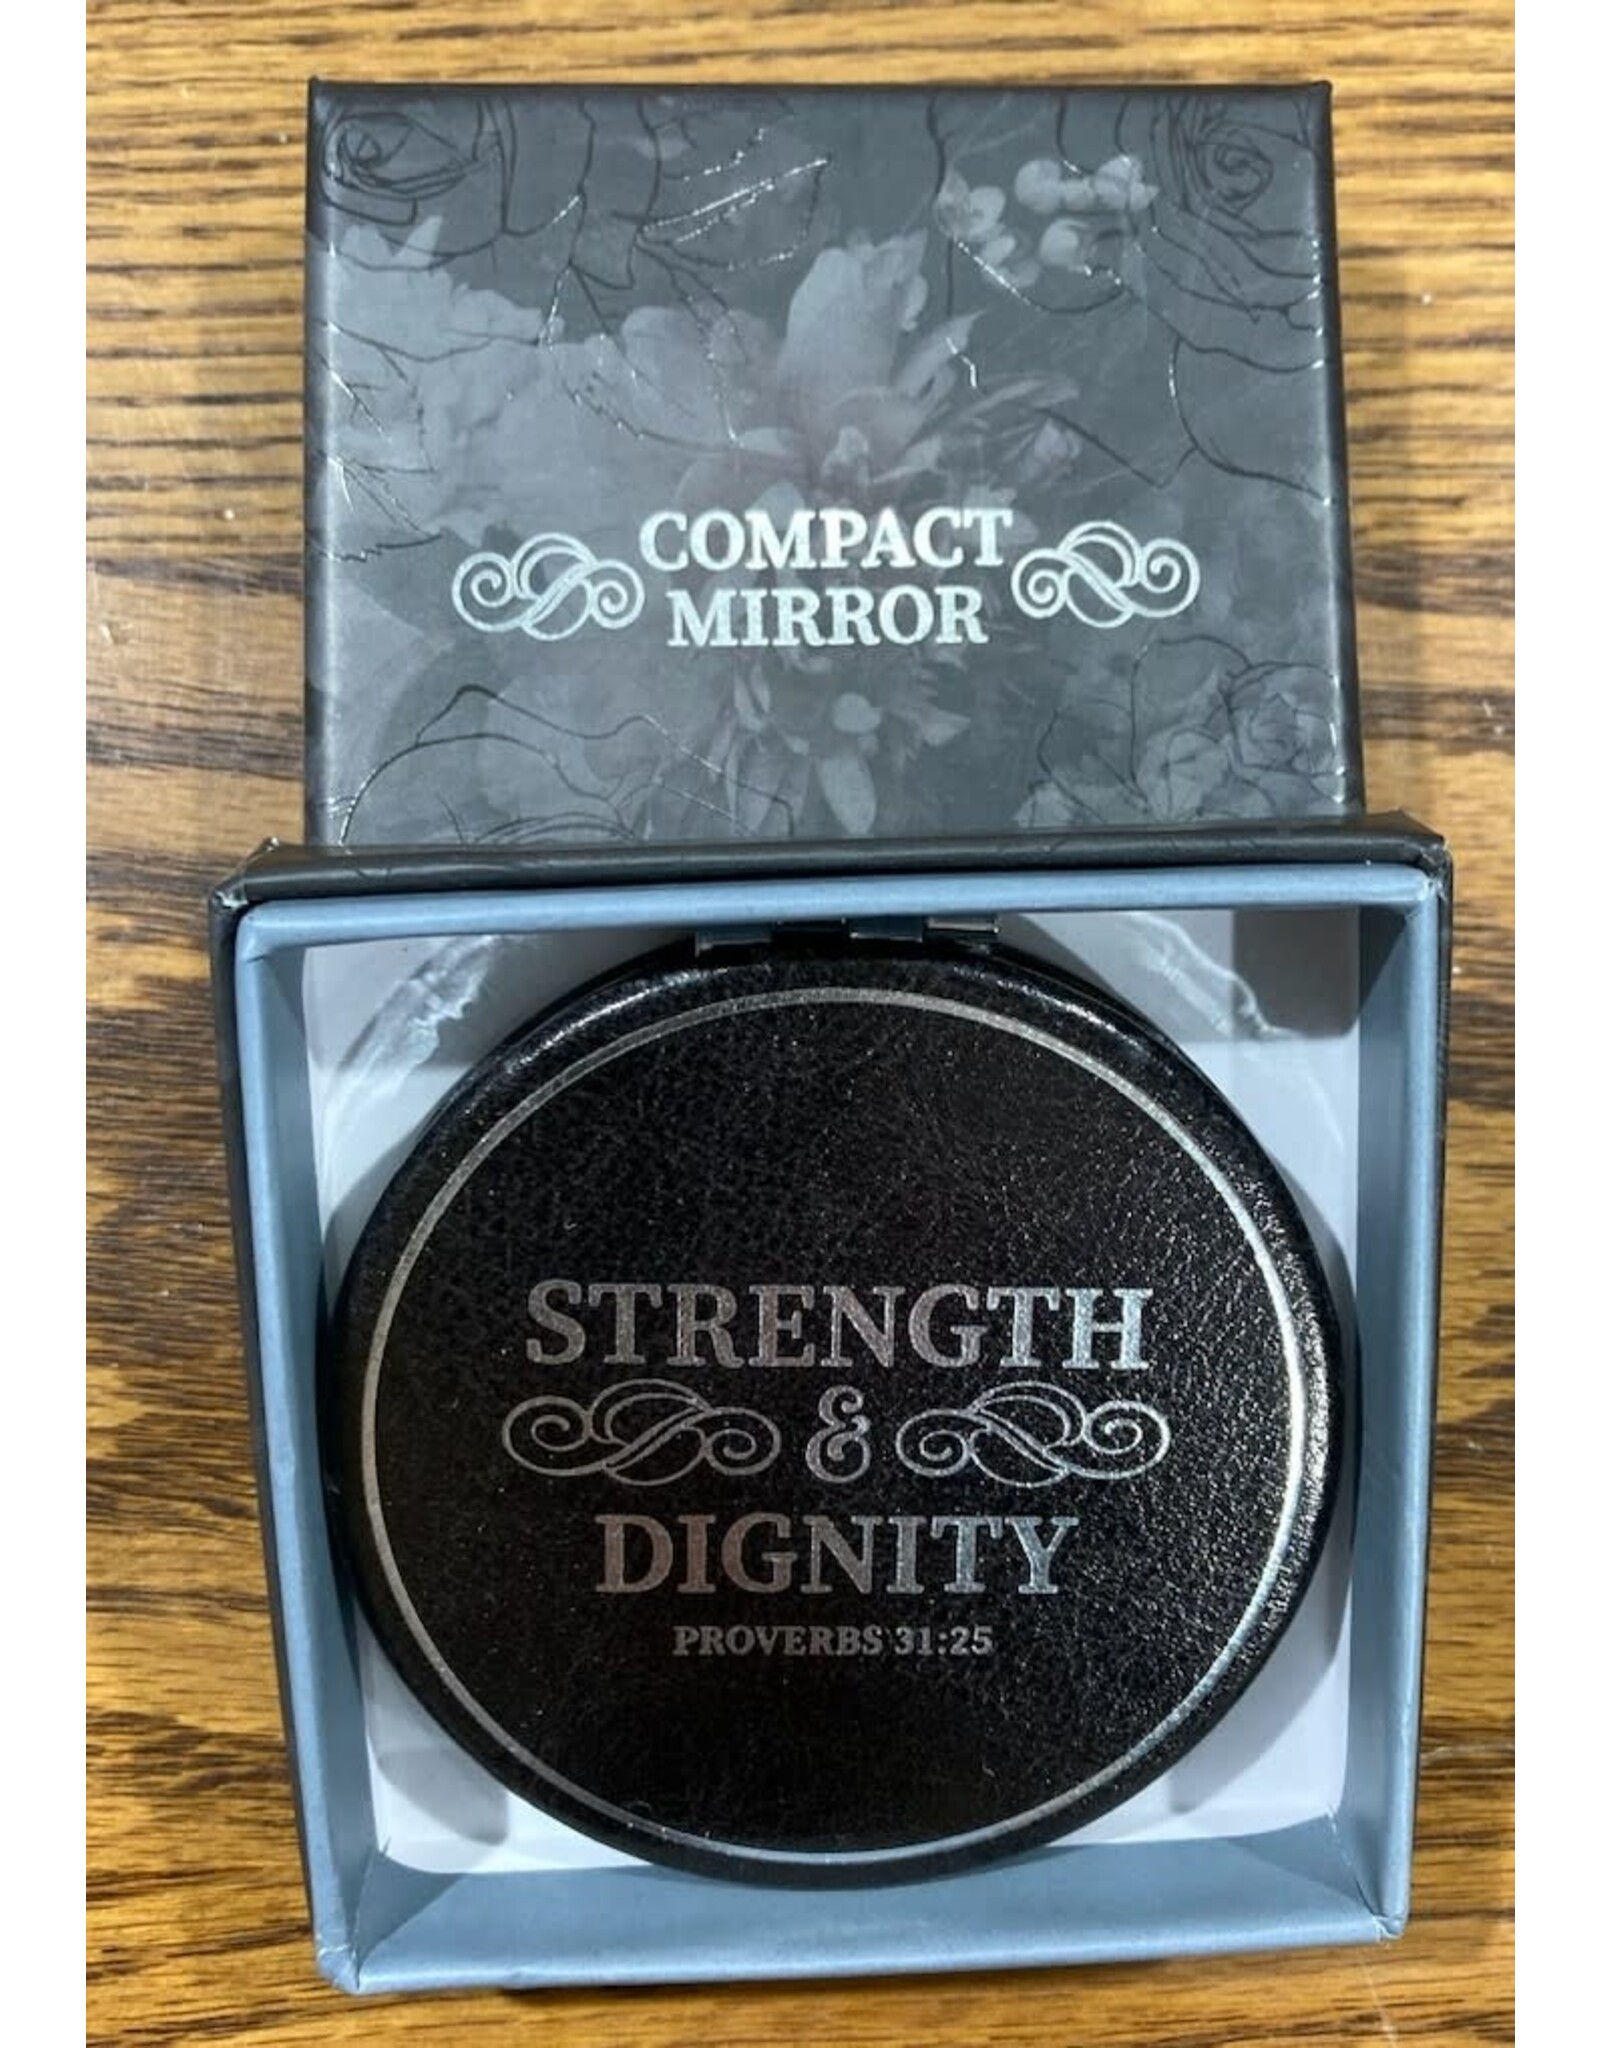 Christian Art Gifts Strength & Dignity Compact Mirror